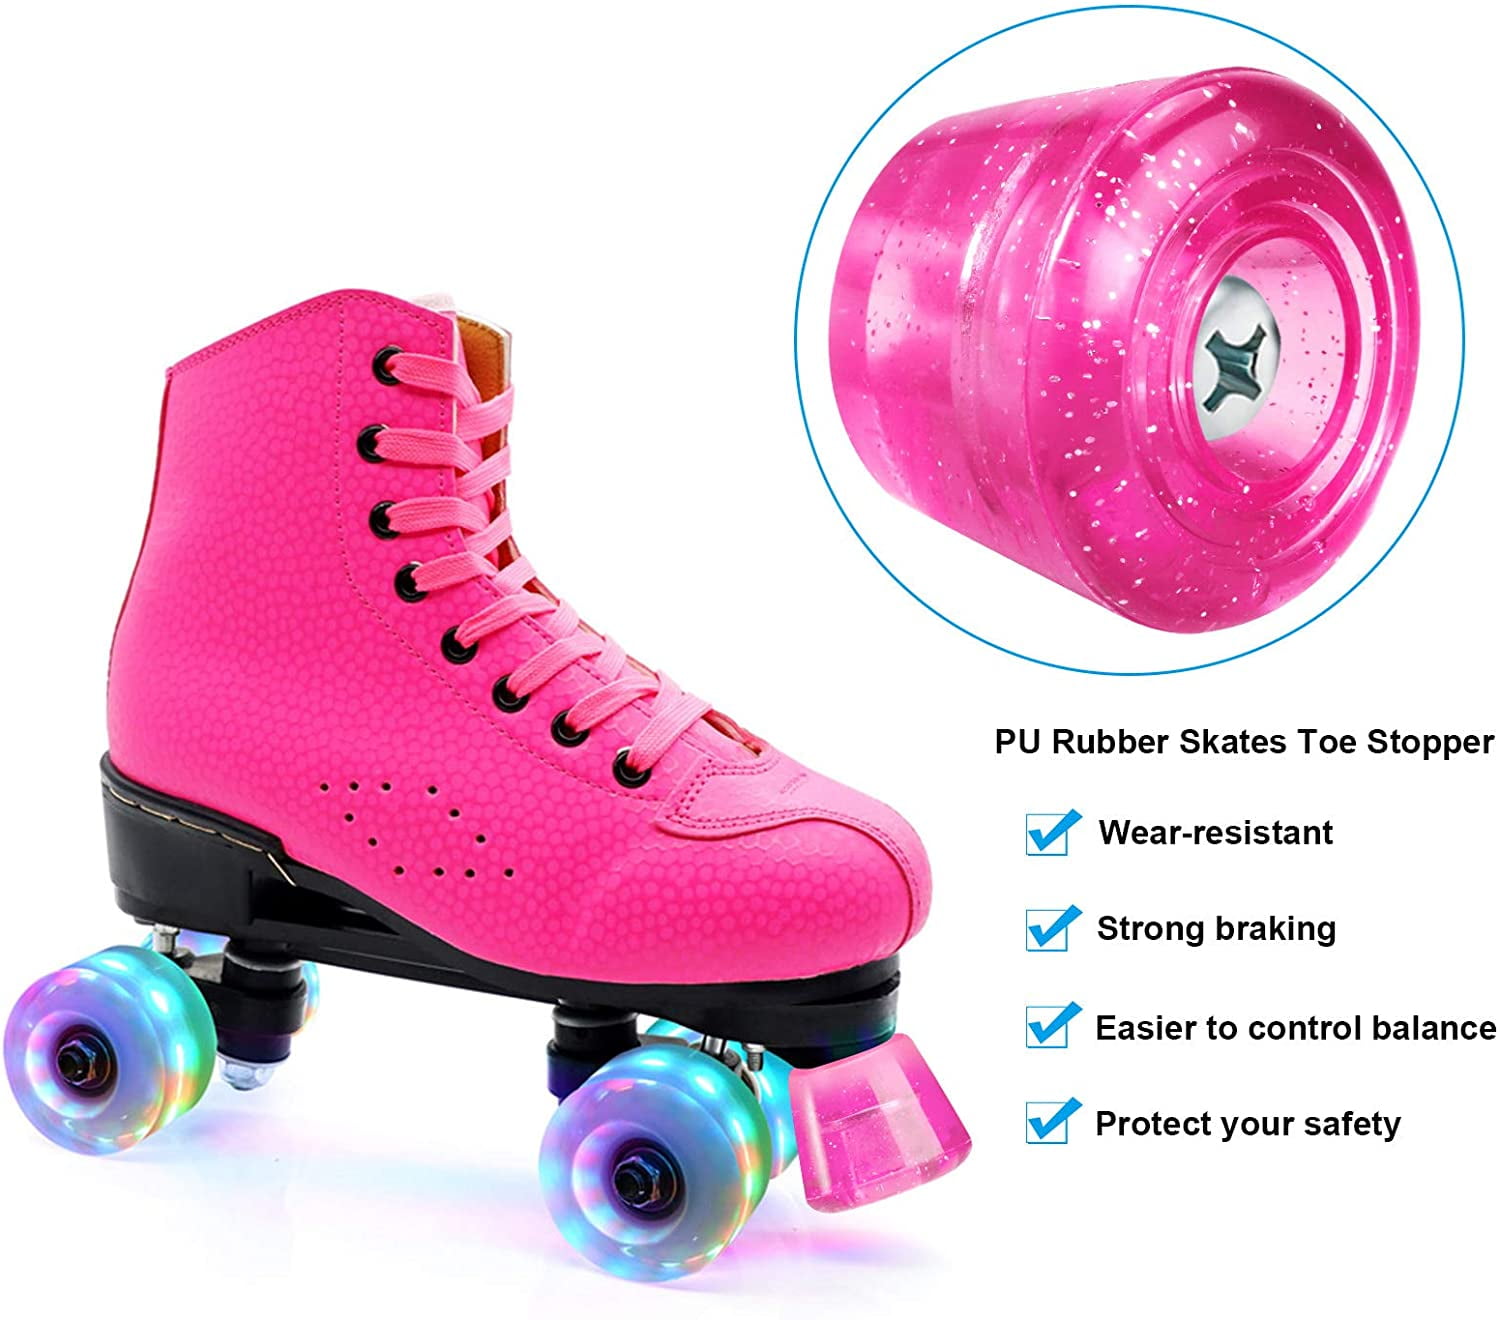 4 Pieces Roller Skate Toe Stoppers Rubber Roller Skates Brakes with 4 Pieces Screws and 1 Piece Dual Purpose Screwdriver 